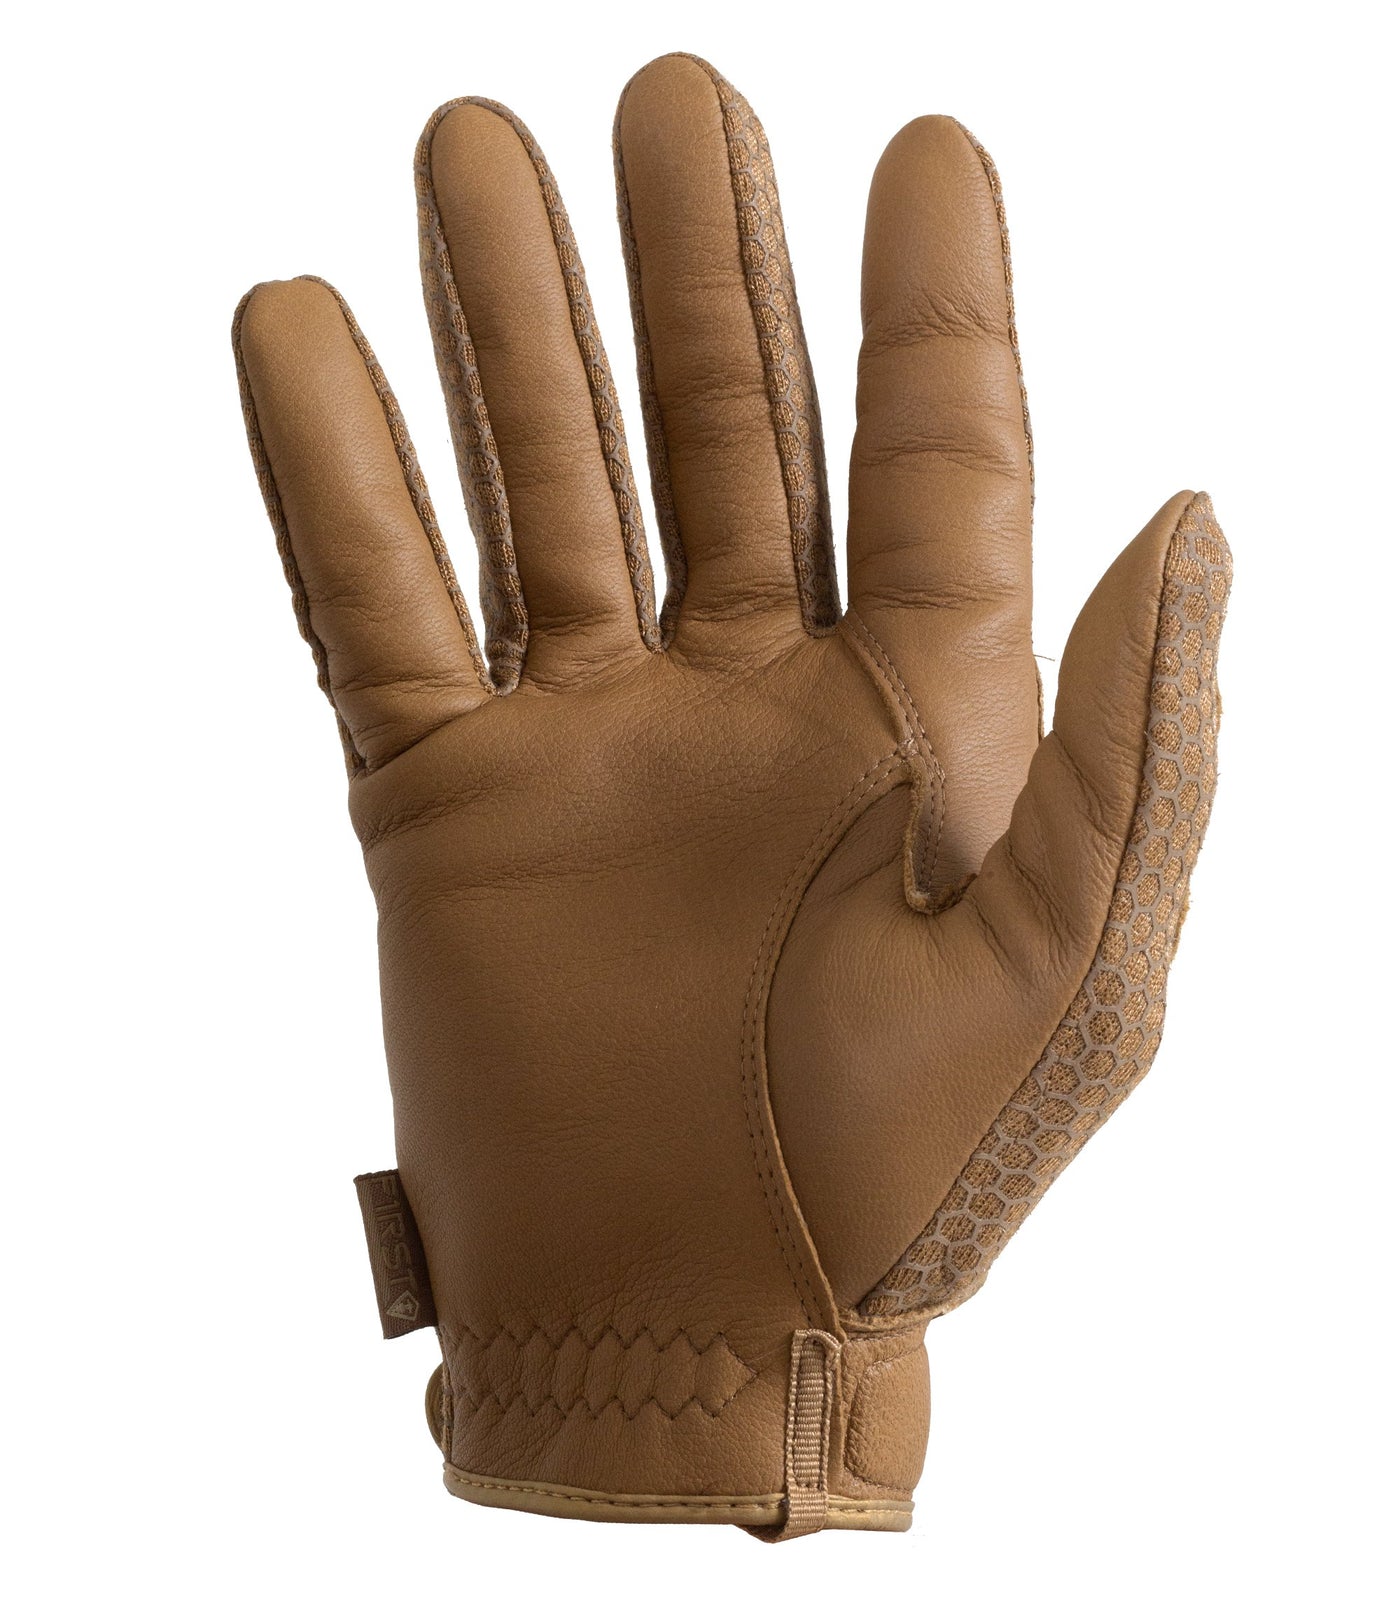 Palm of Men's Slash & Flash Protective Knuckle Glove in Coyote